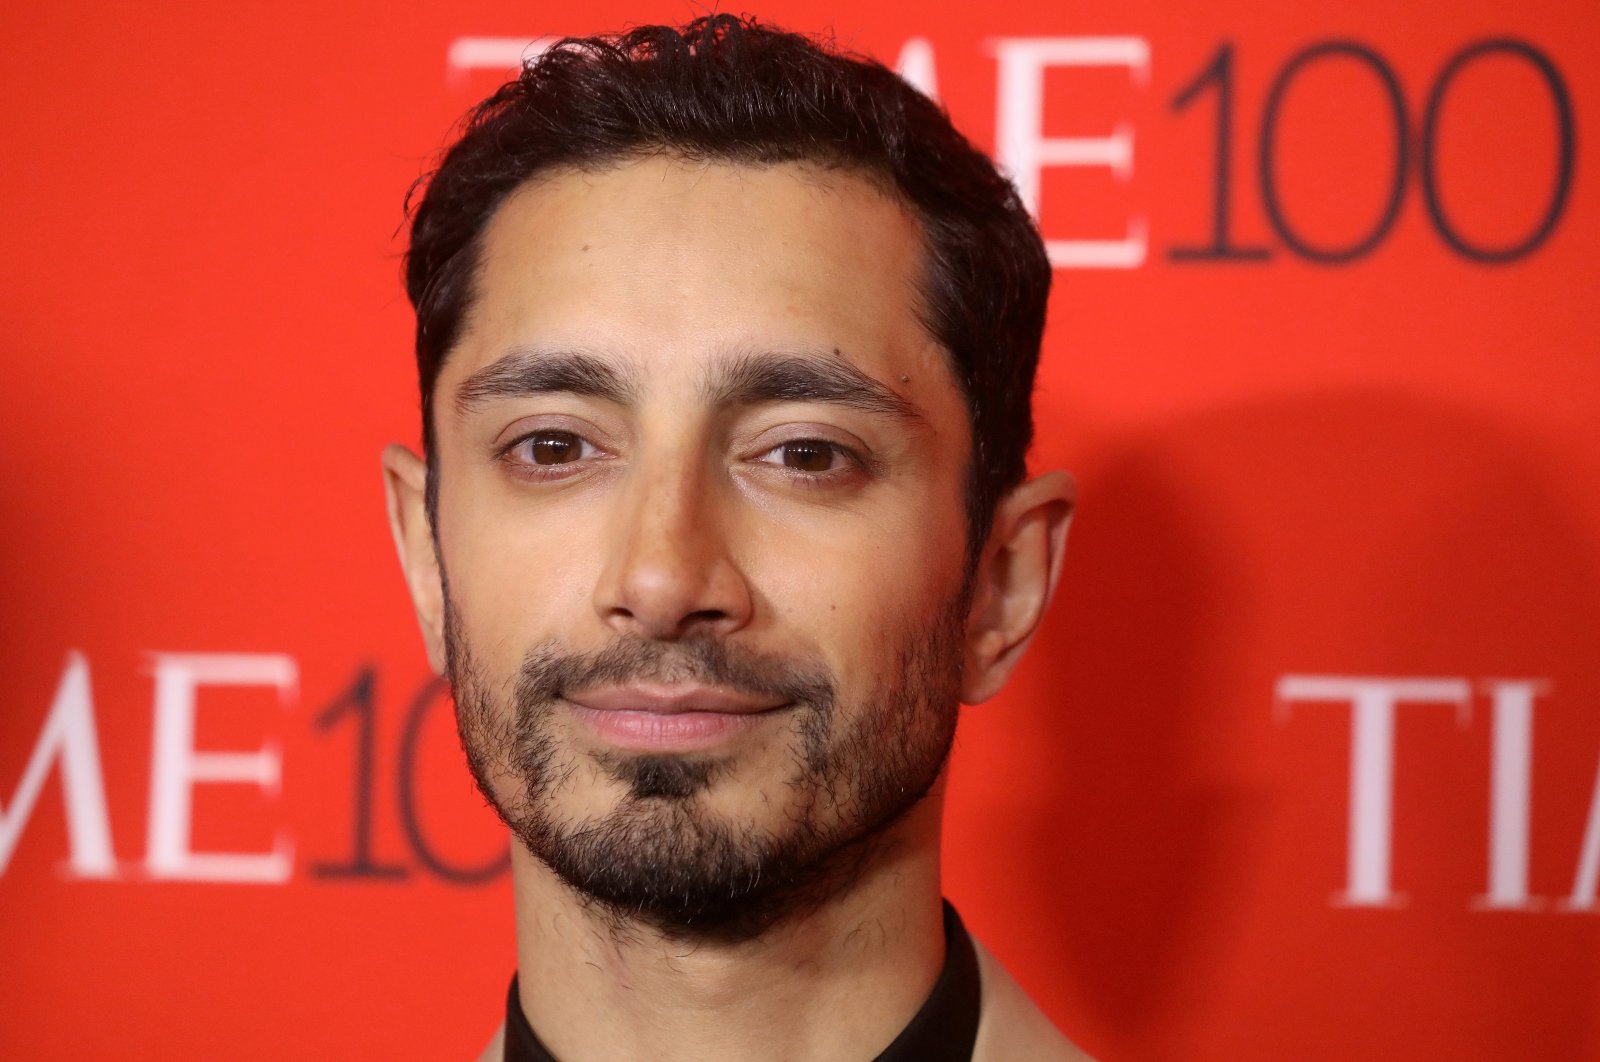 Actor Riz Ahmed arrives for the Time 100 Gala in the Manhattan borough of New York, New York, U.S., April 25, 2017. (REUTERS Photo)